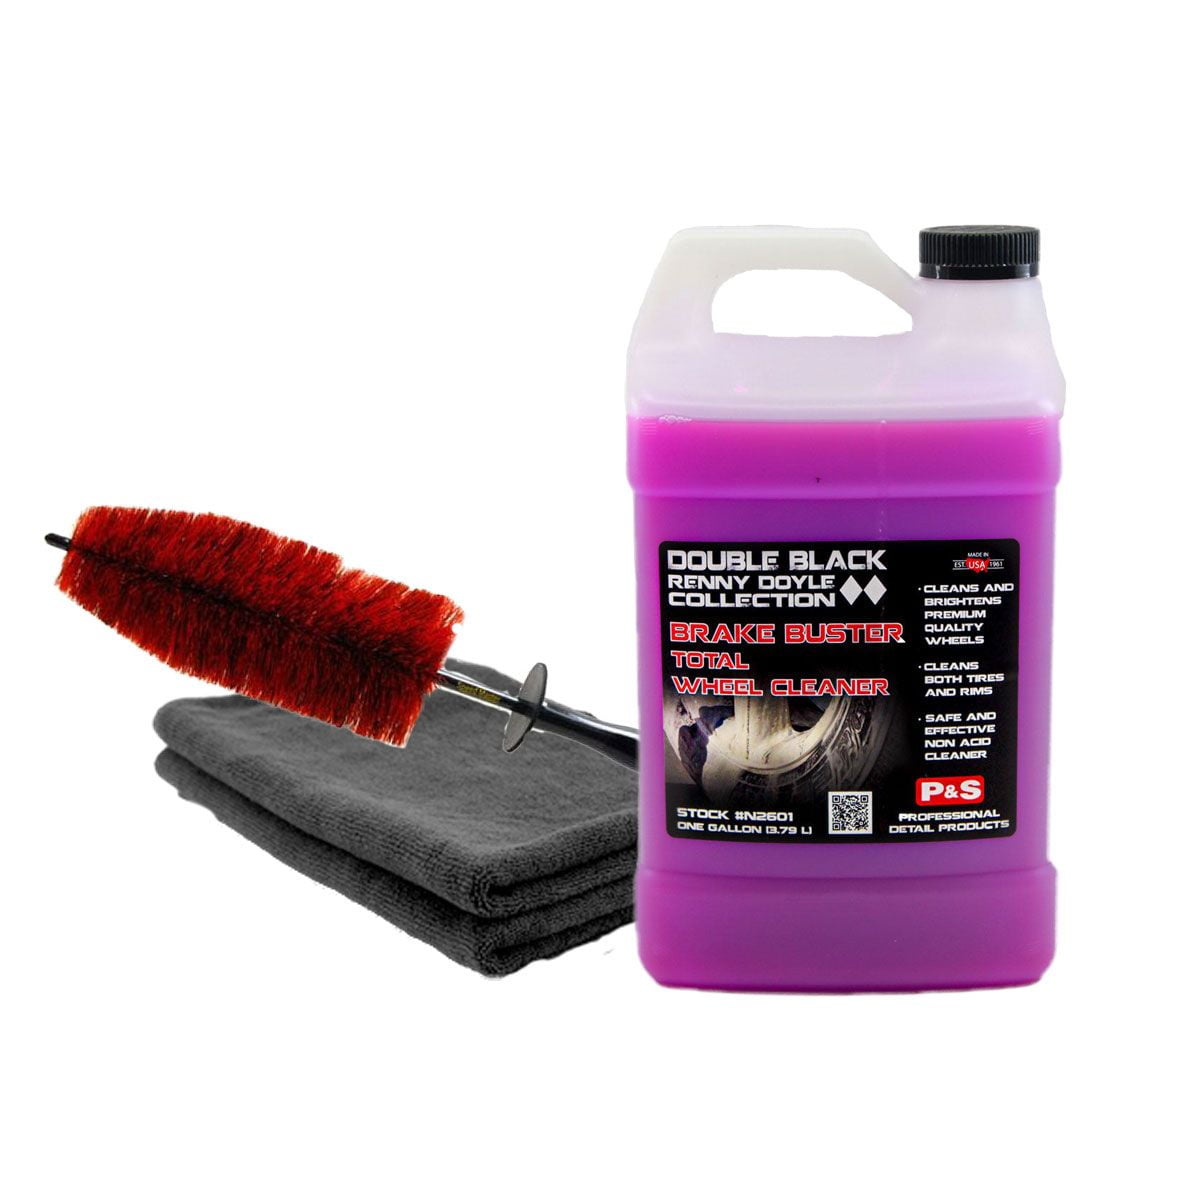 P&S BRAKE BUSTER FOAMING WHEEL CLEANER REVIEW 